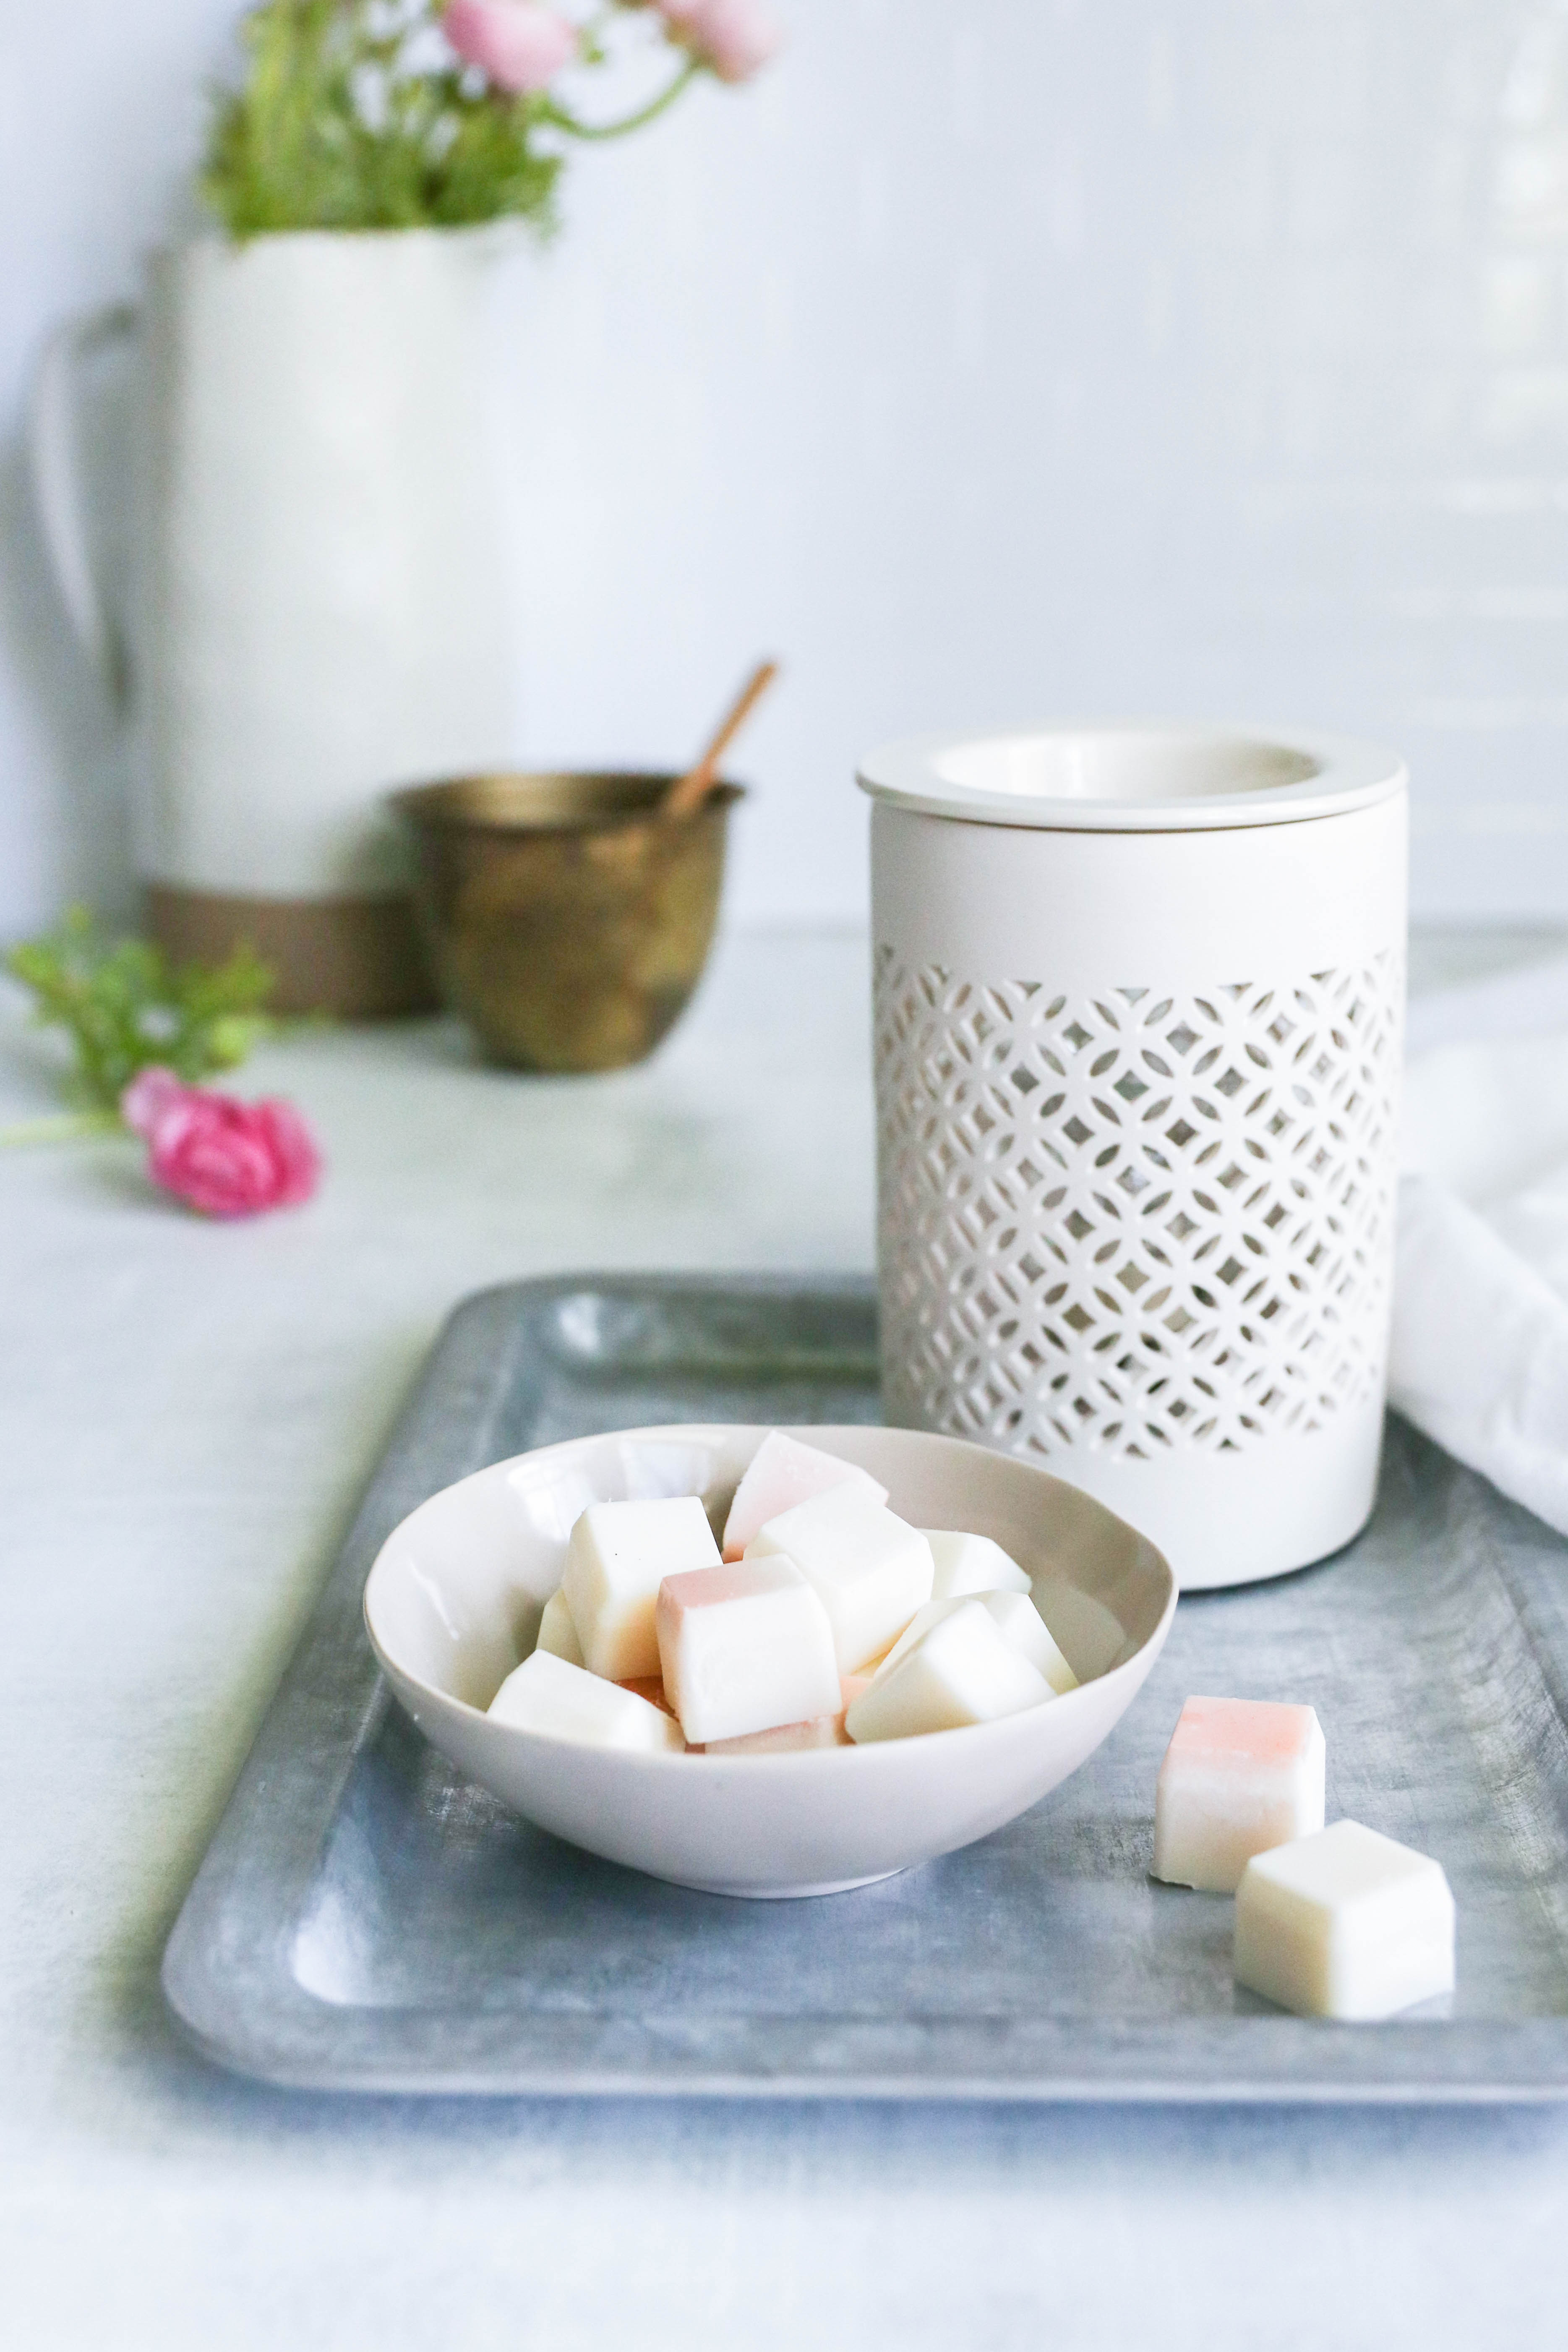 How to Make Soy Wax Melts with Essential Oils